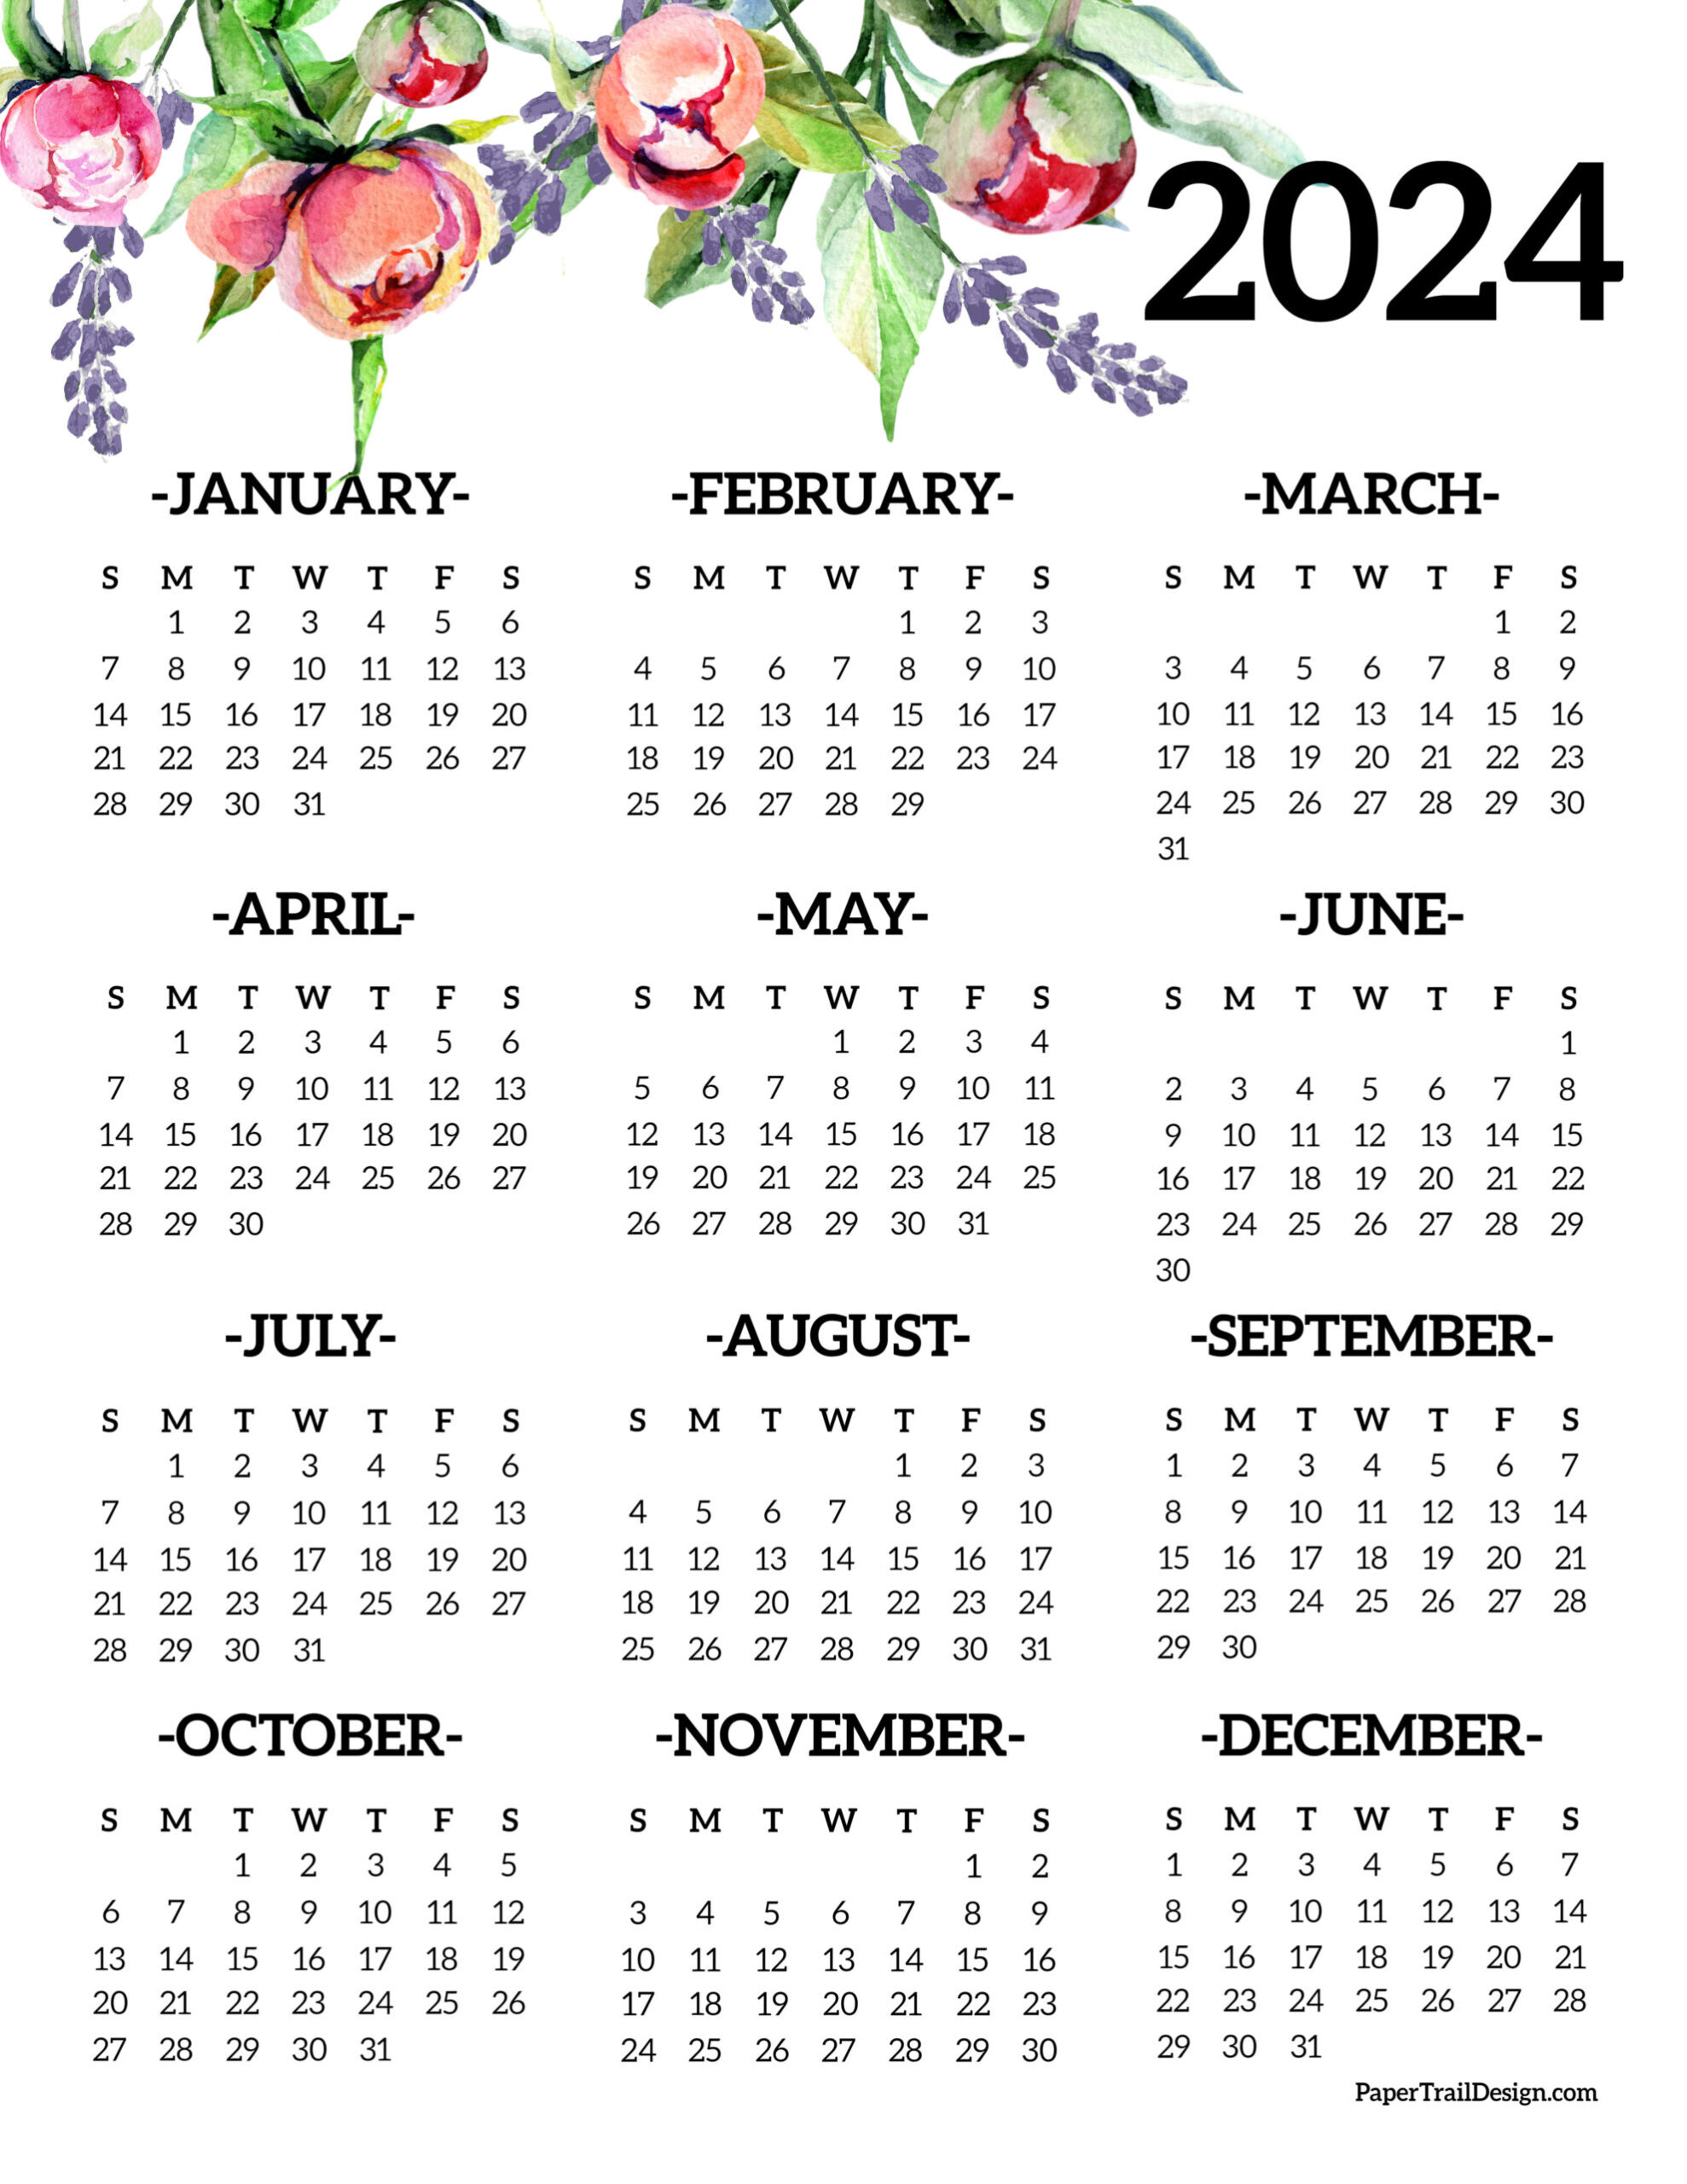 Calendar 2024 Printable One Page - Paper Trail Design | 2024 Annual Calendar One Page